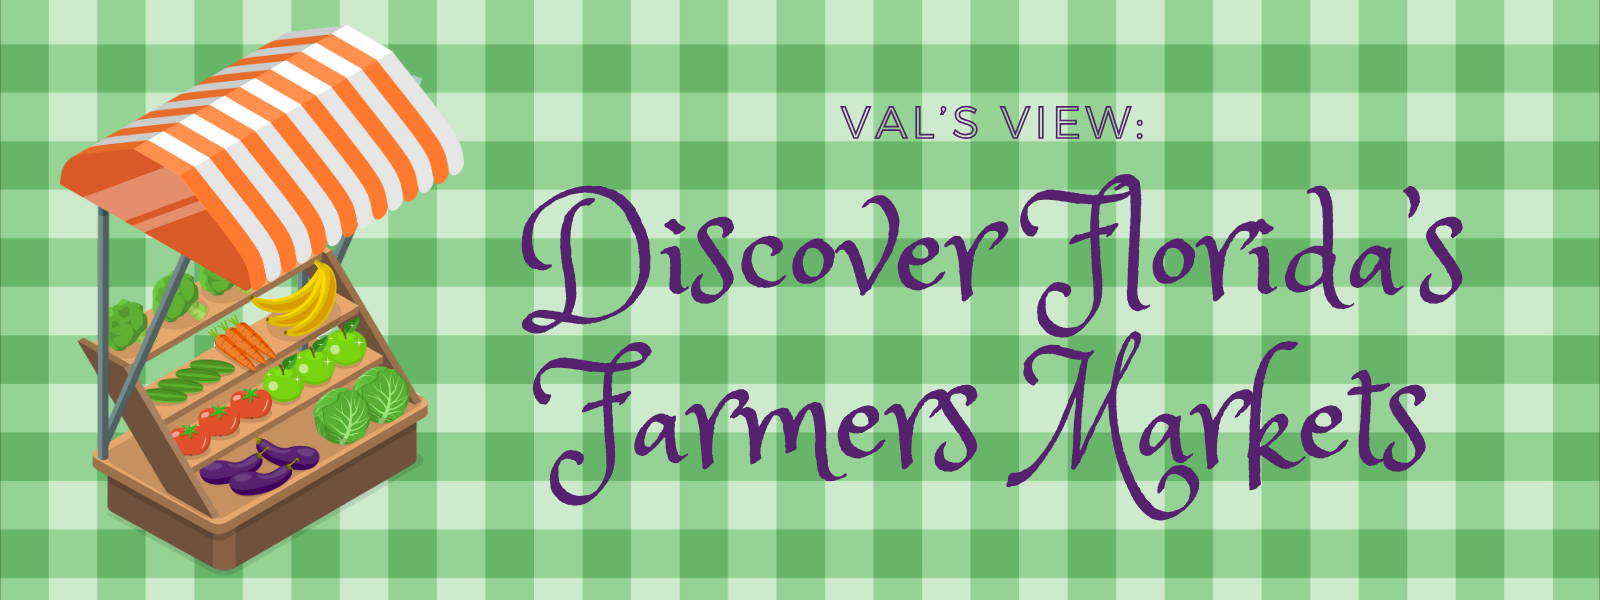 Val's View: Discover Florida's Farmers Markets